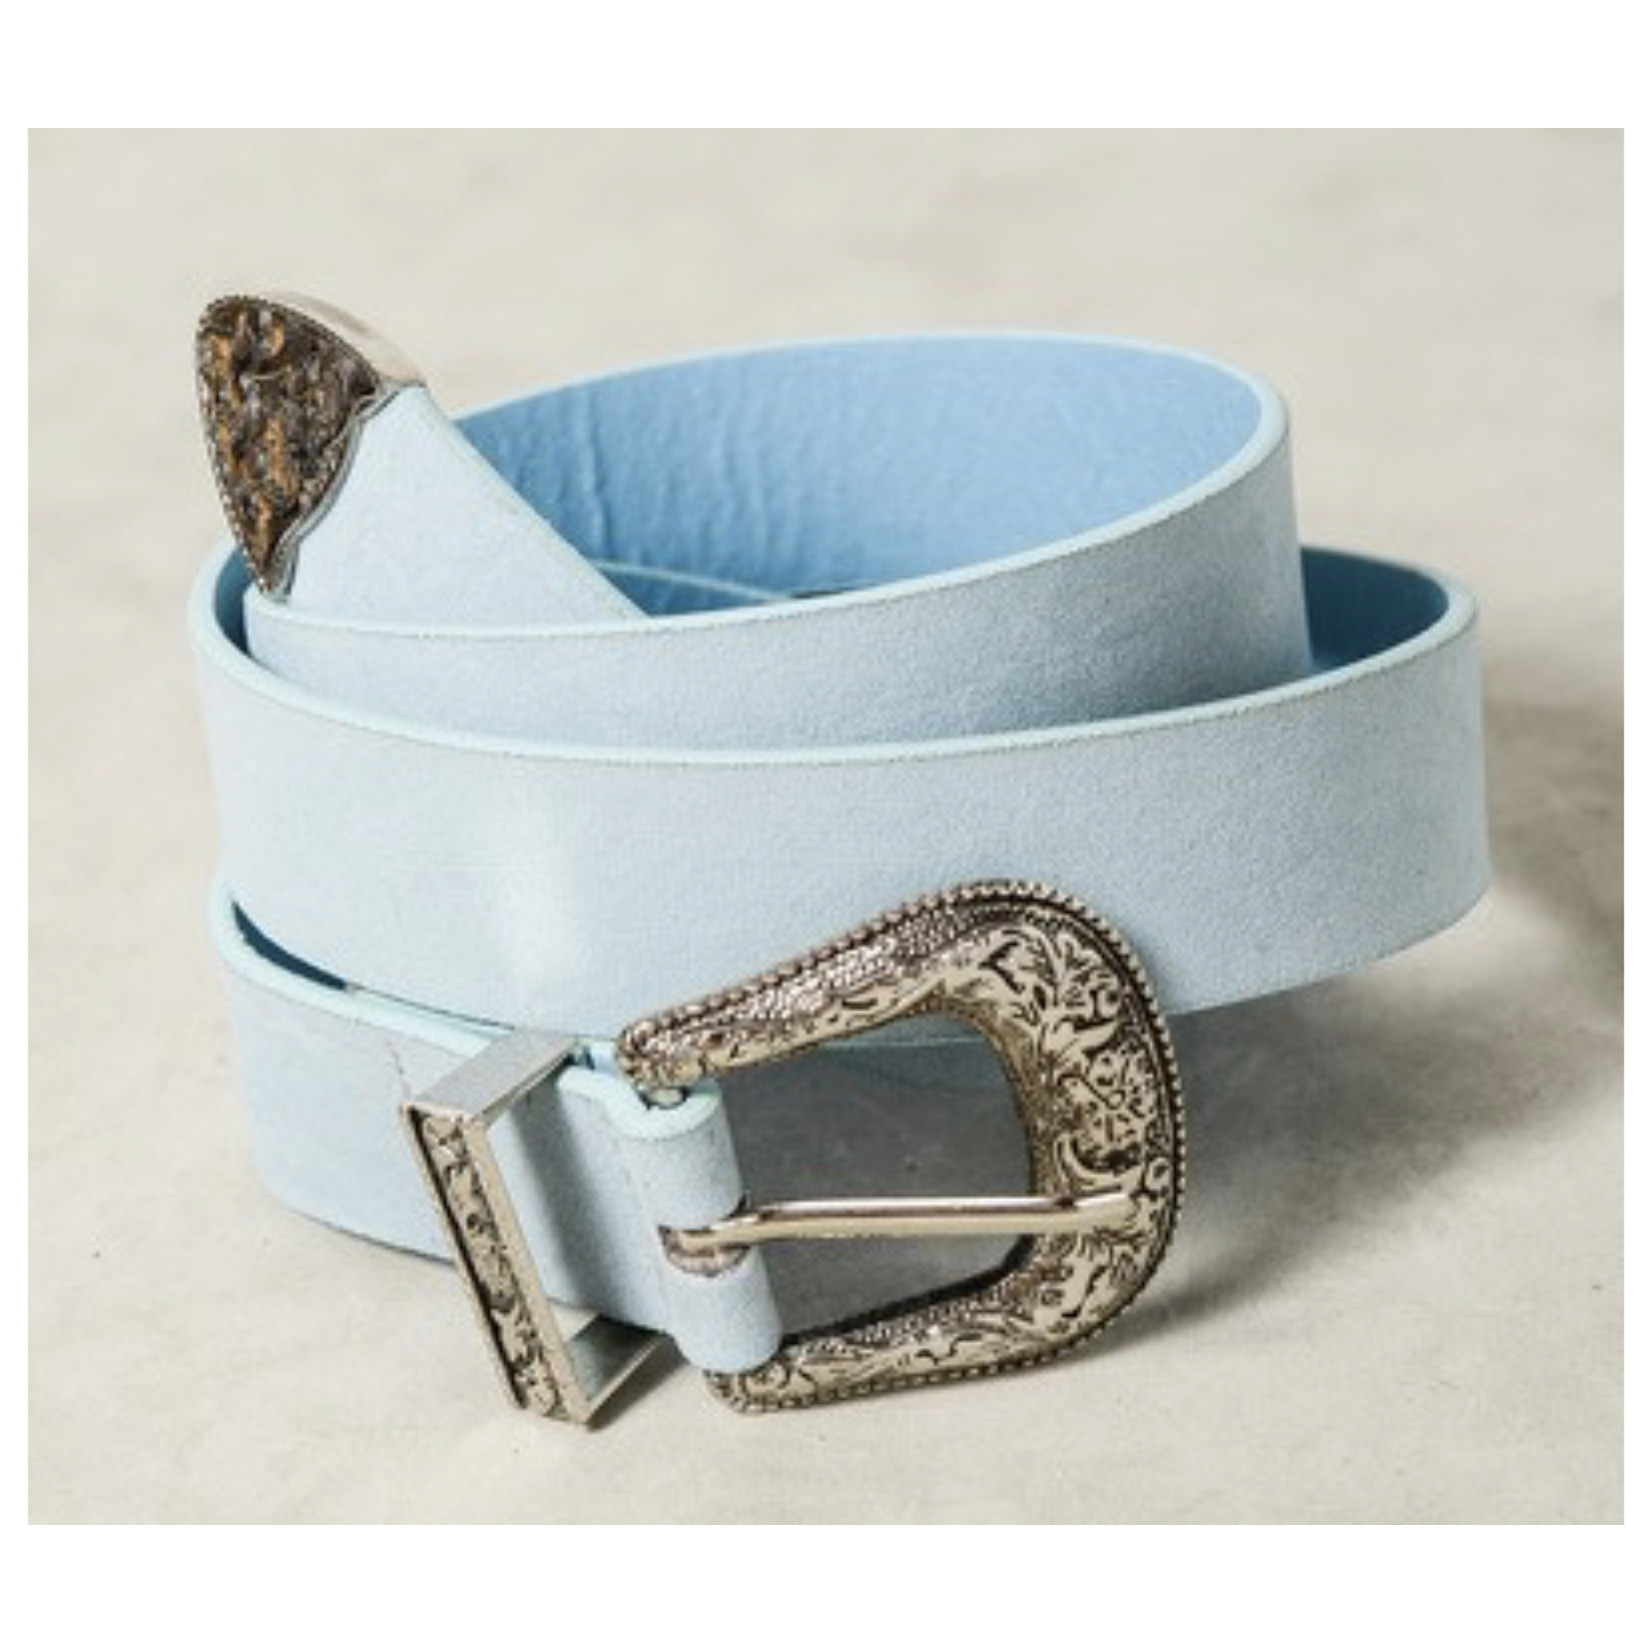 WALL TO WALL Western Style Belt